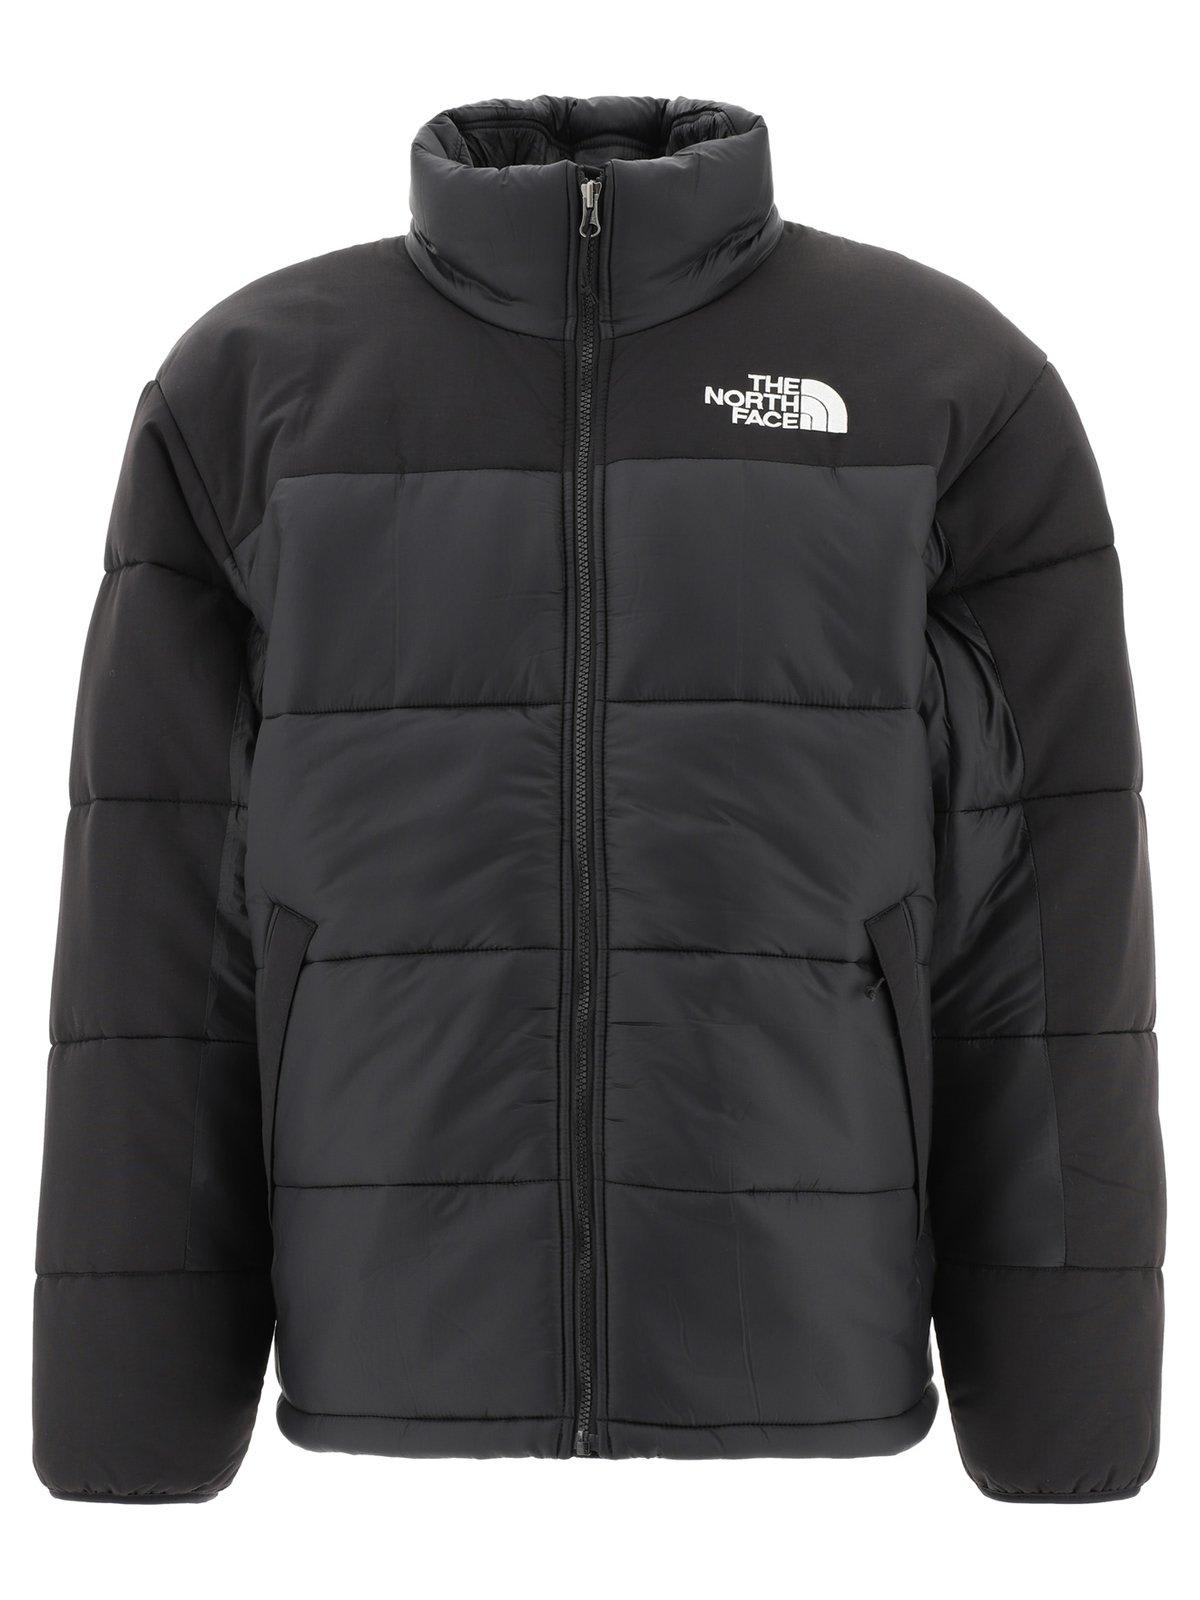 THE NORTH FACE HIMALAYAN PUFFER HIGH NECK JACKET